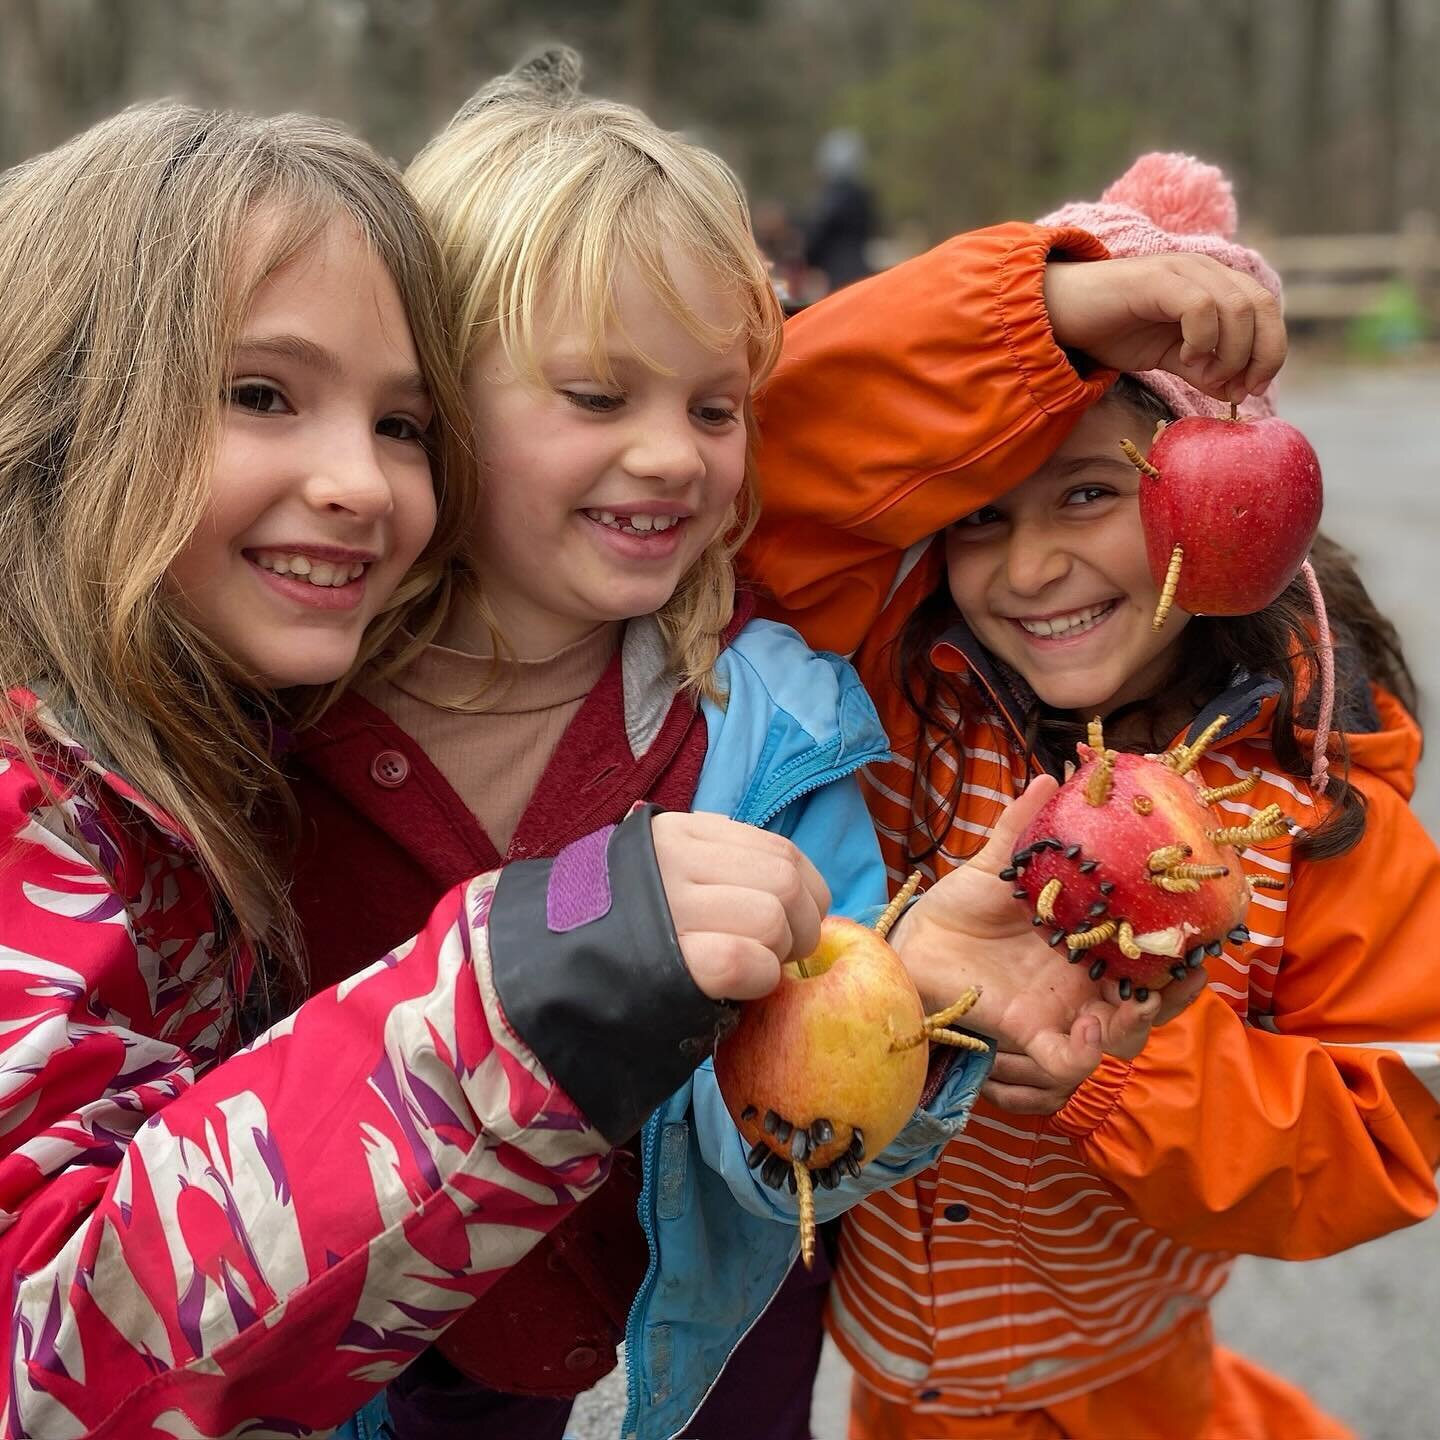 More gifts, this time for our chickens. 🍎🪱🐓

#OutdoorSchool #OutdoorClassroom #NatureSchool #ForestSchool #NatureSchooling #OptOutside #EcoSchool #InquiryBasedLearning #ExperientialEducation #NatureBasedLearning #ProgressiveEducation #HudsonValley